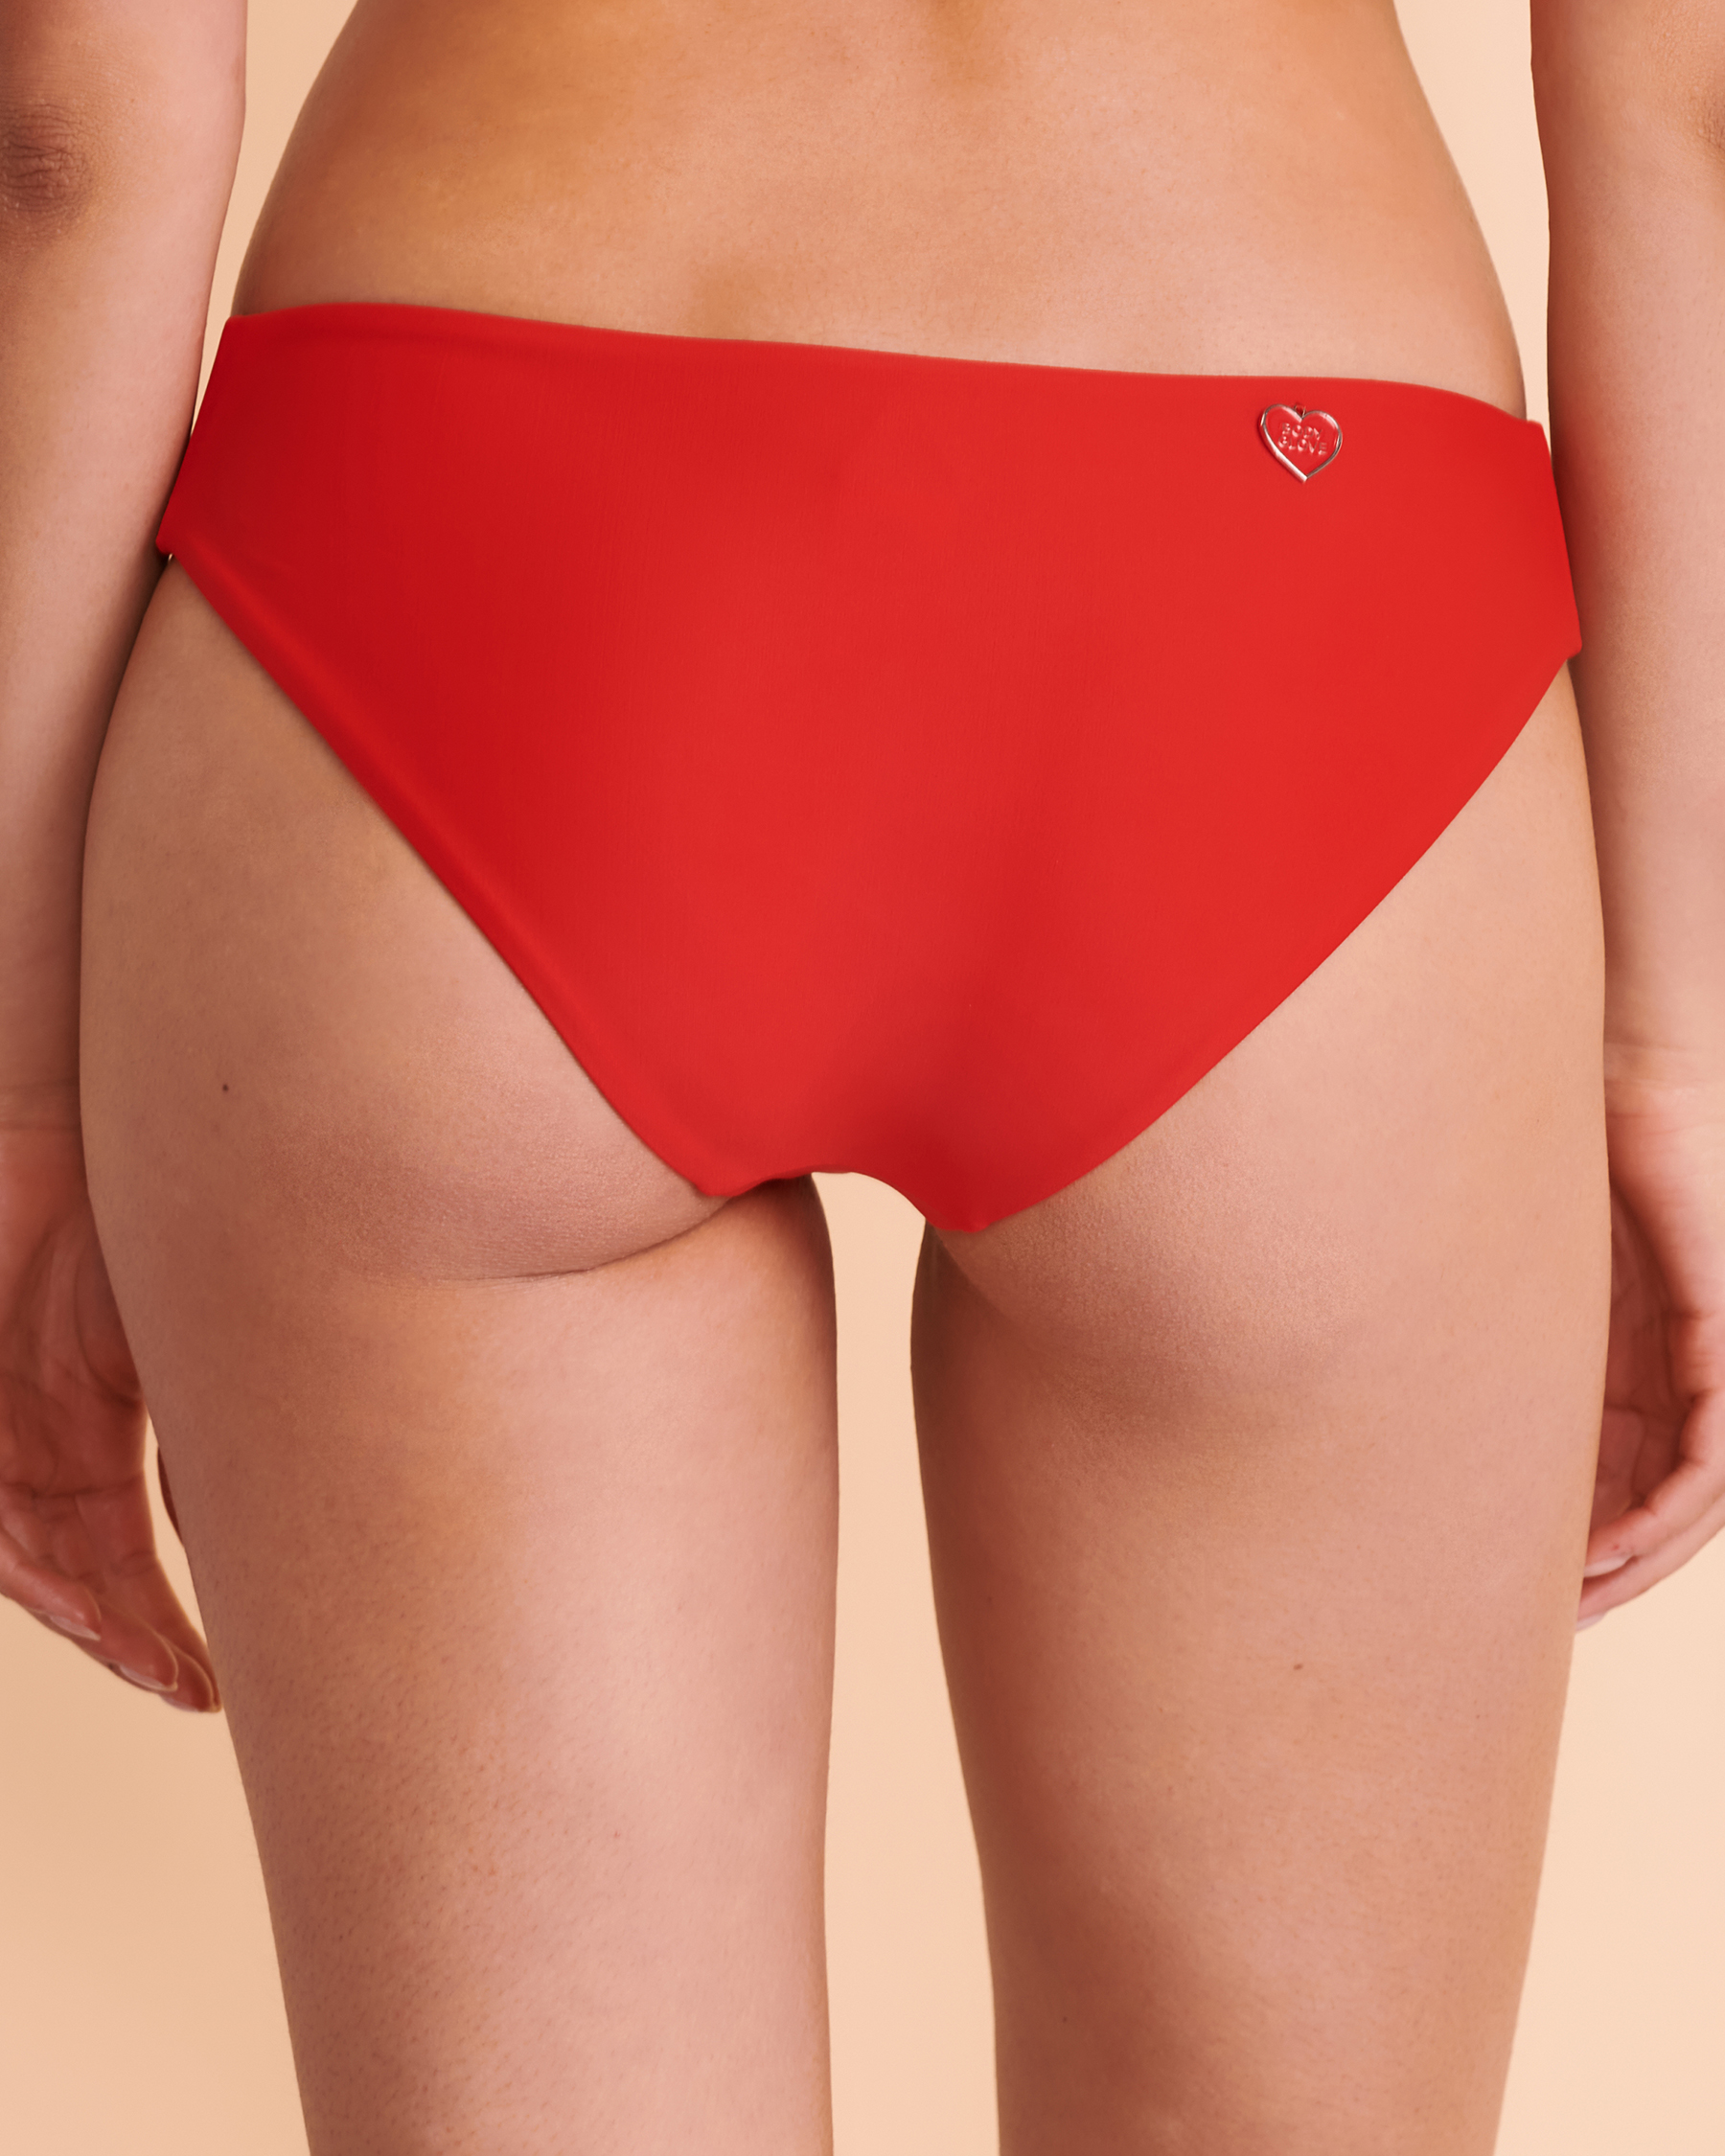 BODY GLOVE SMOOTHIES Ruby Side Bands Bikini Bottom Red 39506148 - View2